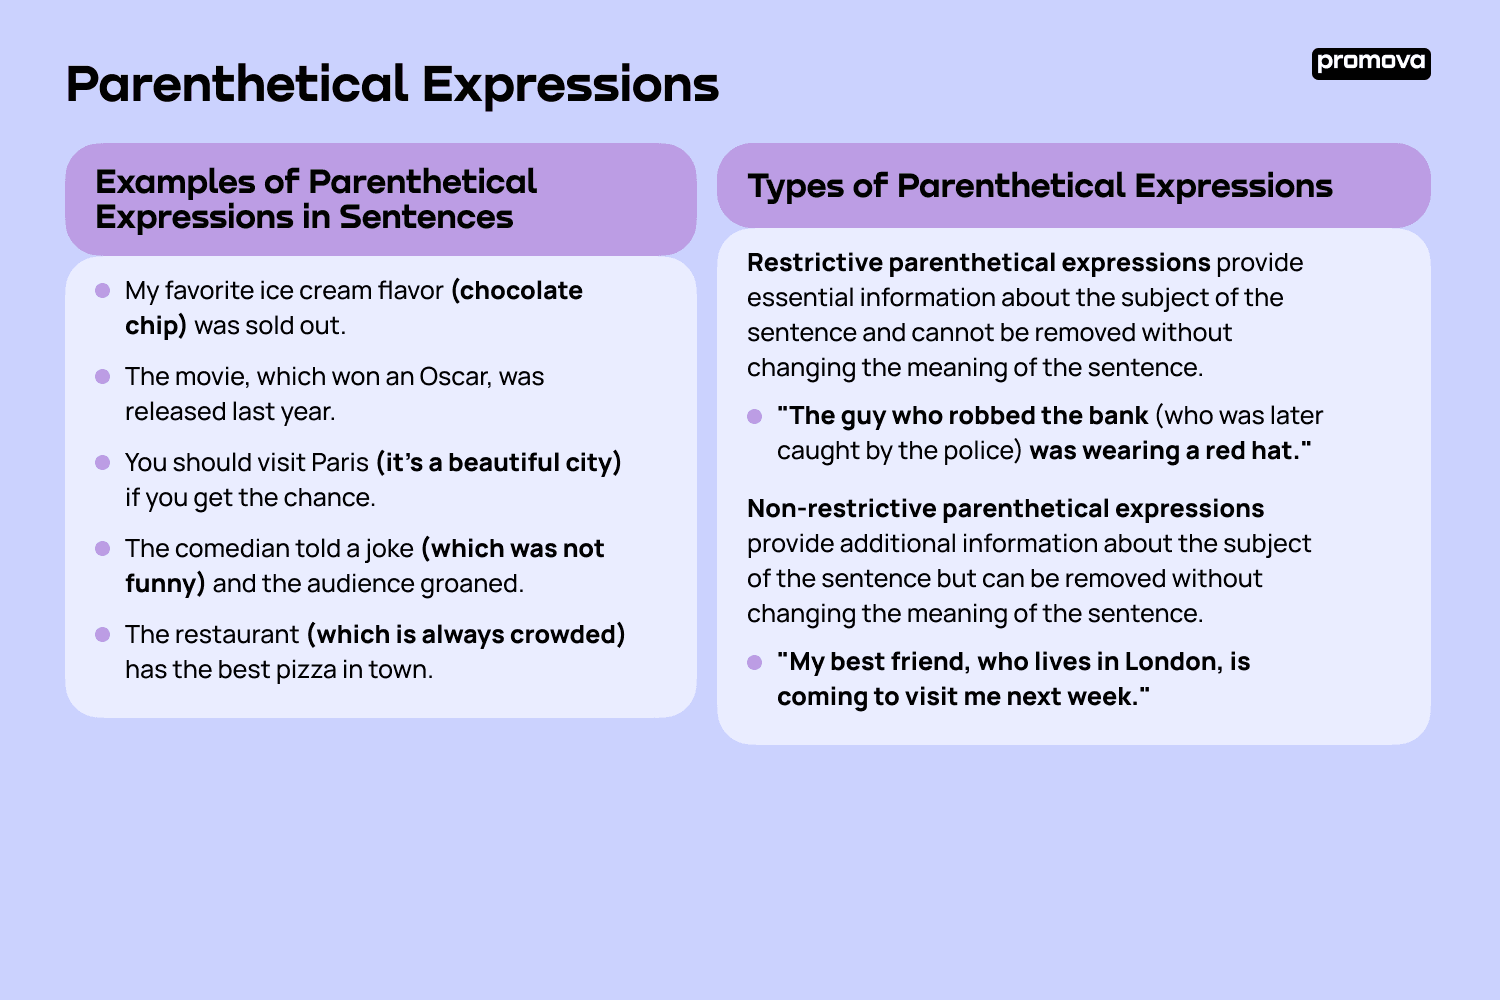 Examples of Parenthetical Expressions in Sentences